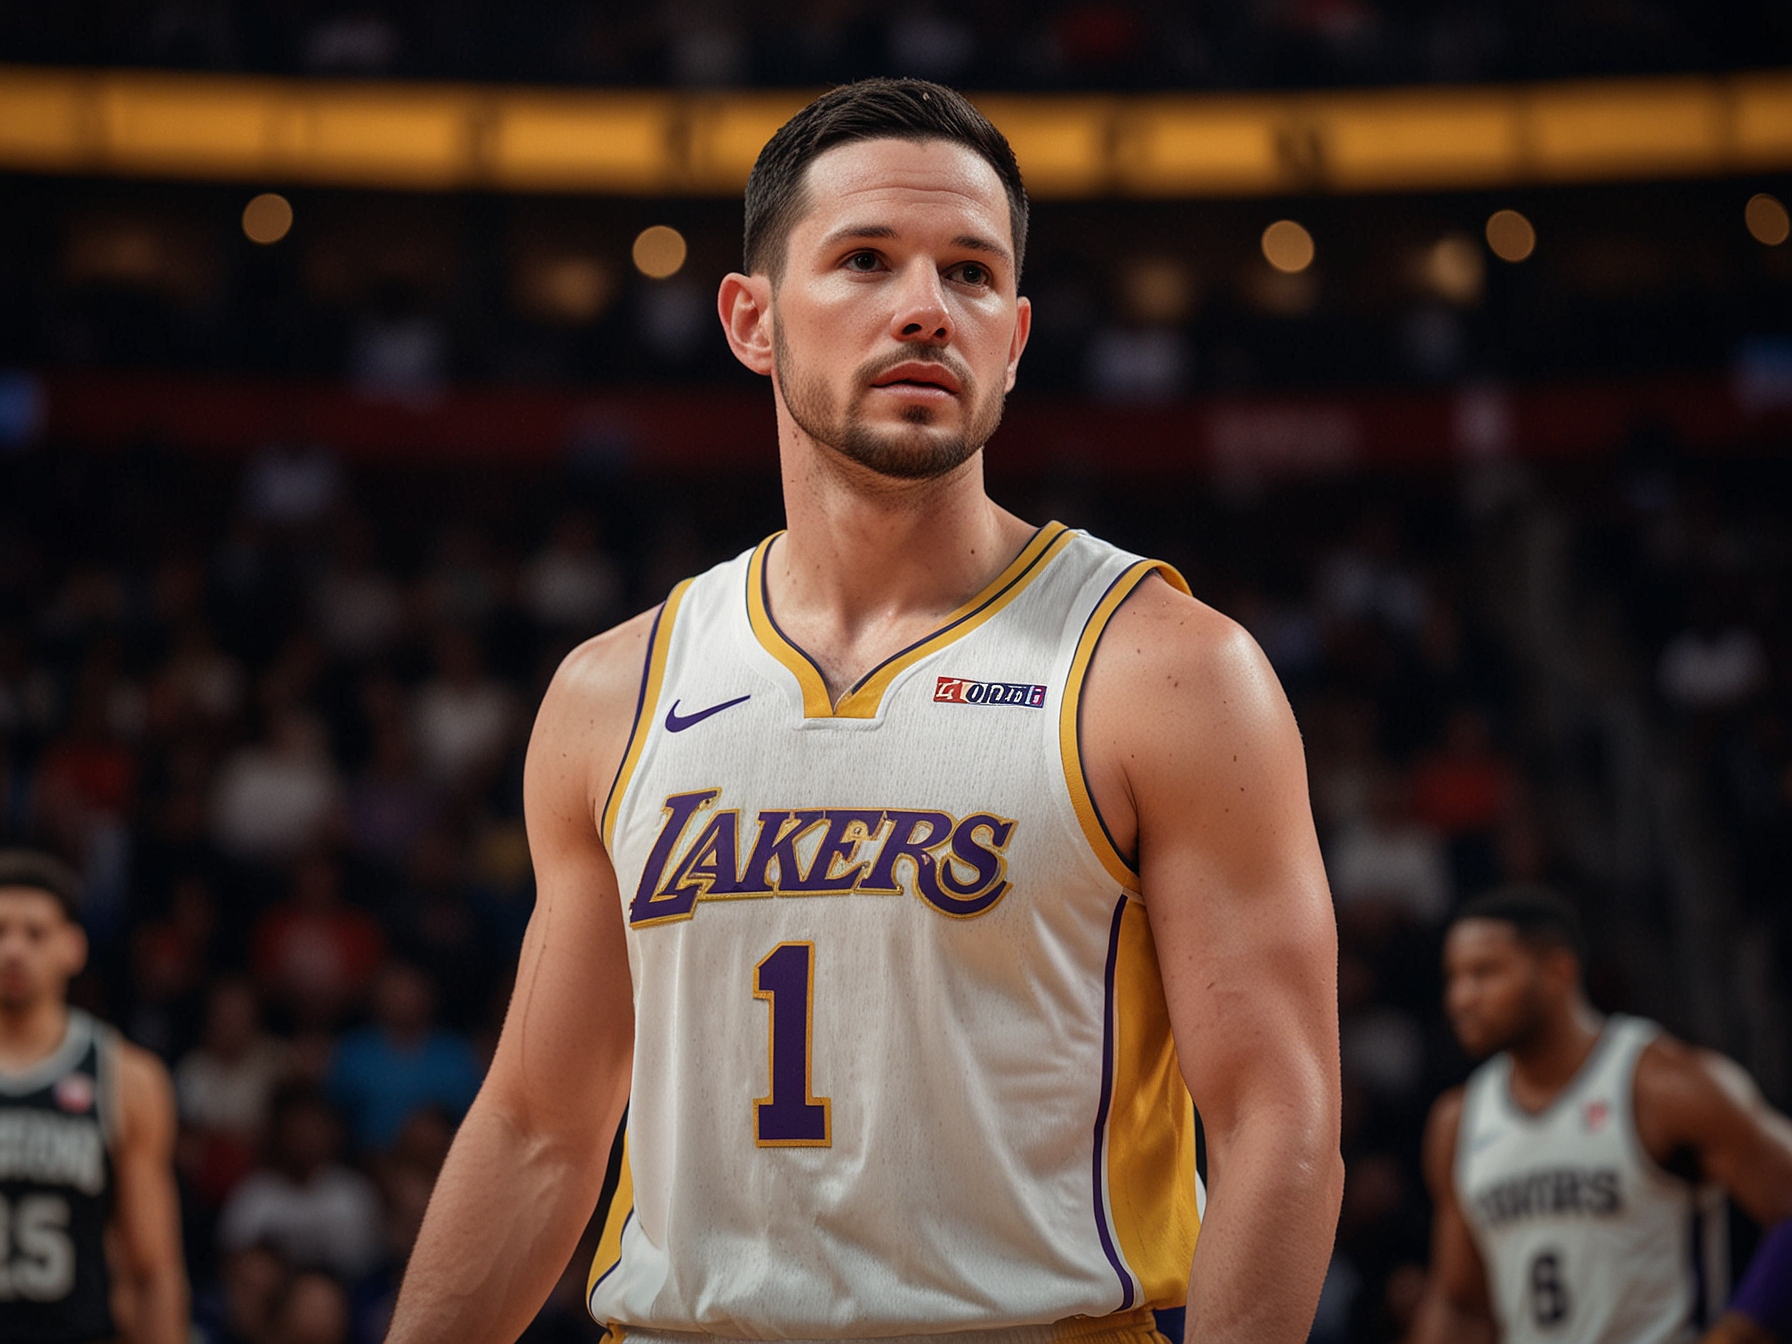 JJ Redick, in Lakers apparel, stands confidently on the basketball court, symbolizing his new role as head coach of the Los Angeles Lakers and marking the beginning of his coaching career.